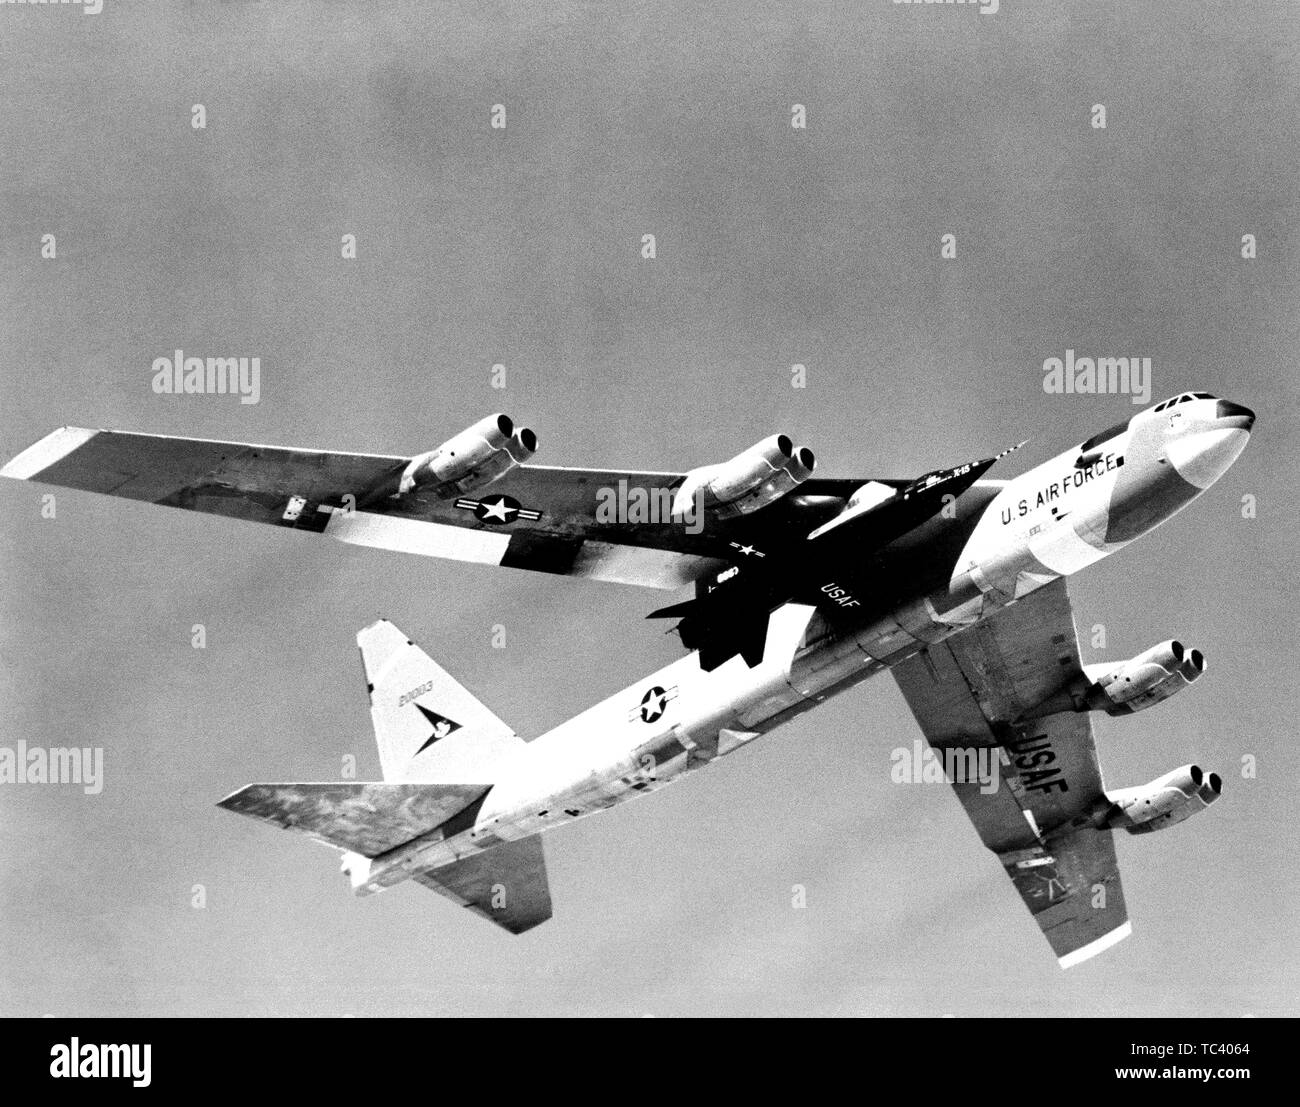 X-15 rocket-powered research aircraft is carried aloft under the wing of its B-52 mothership, 1959. Image courtesy National Aeronautics and Space Administration (NASA). () Stock Photo